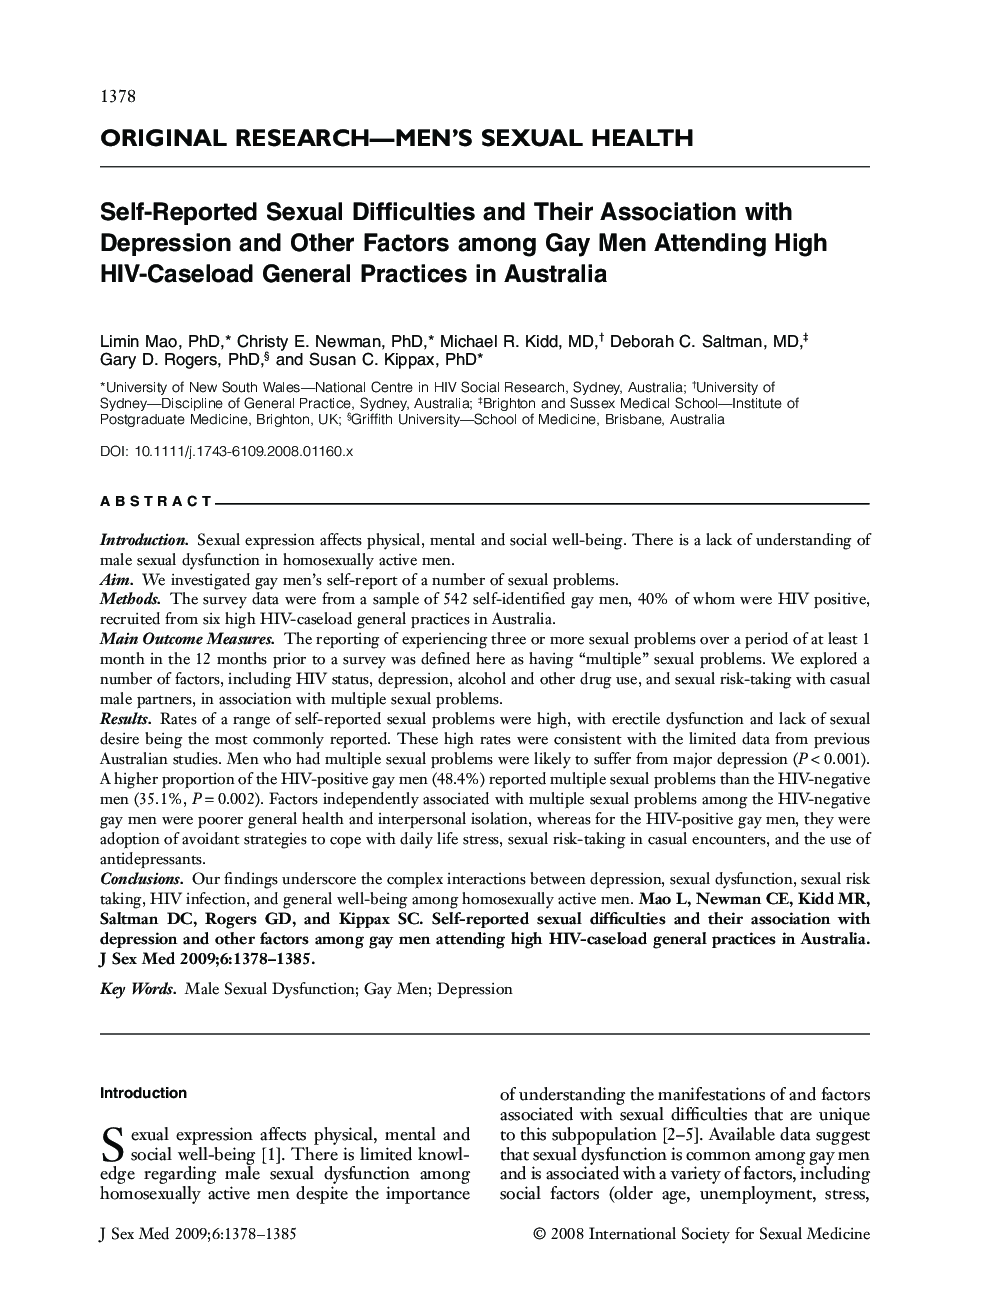 ORIGINAL RESEARCH-MEN'S SEXUAL HEALTH: Self-Reported Sexual Difficulties and Their Association with Depression and Other Factors among Gay Men Attending High HIV-Caseload General Practices in Australia